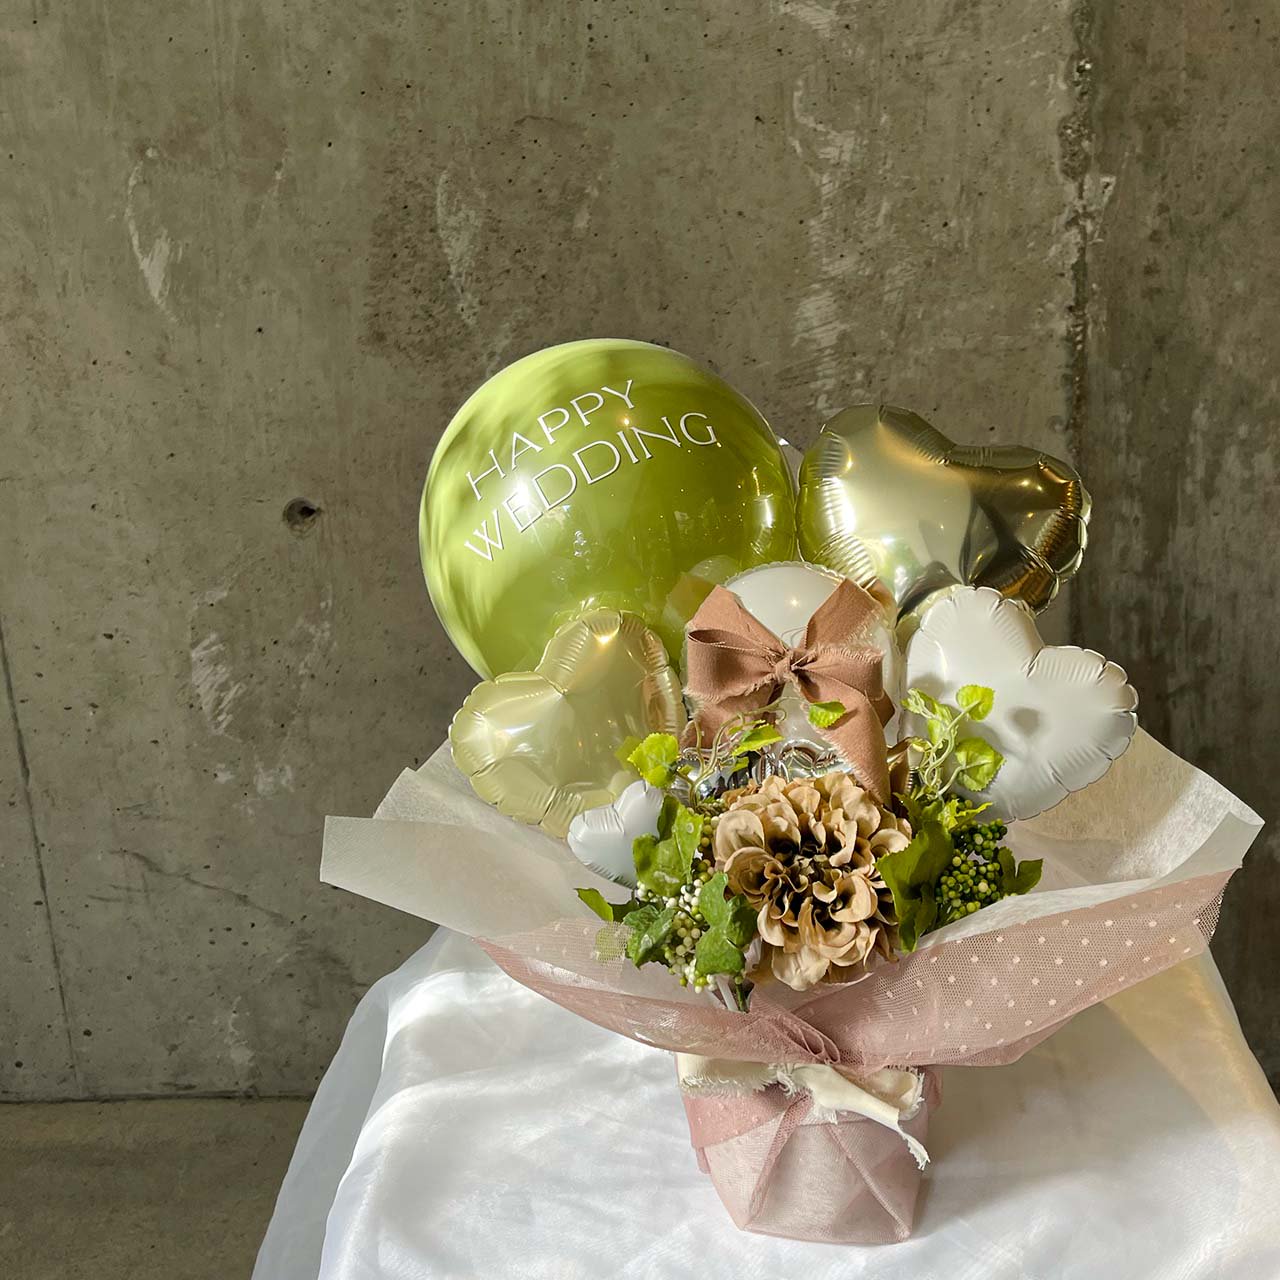 Sours Balloon Gift - Table top type - Х롼󥮥ե